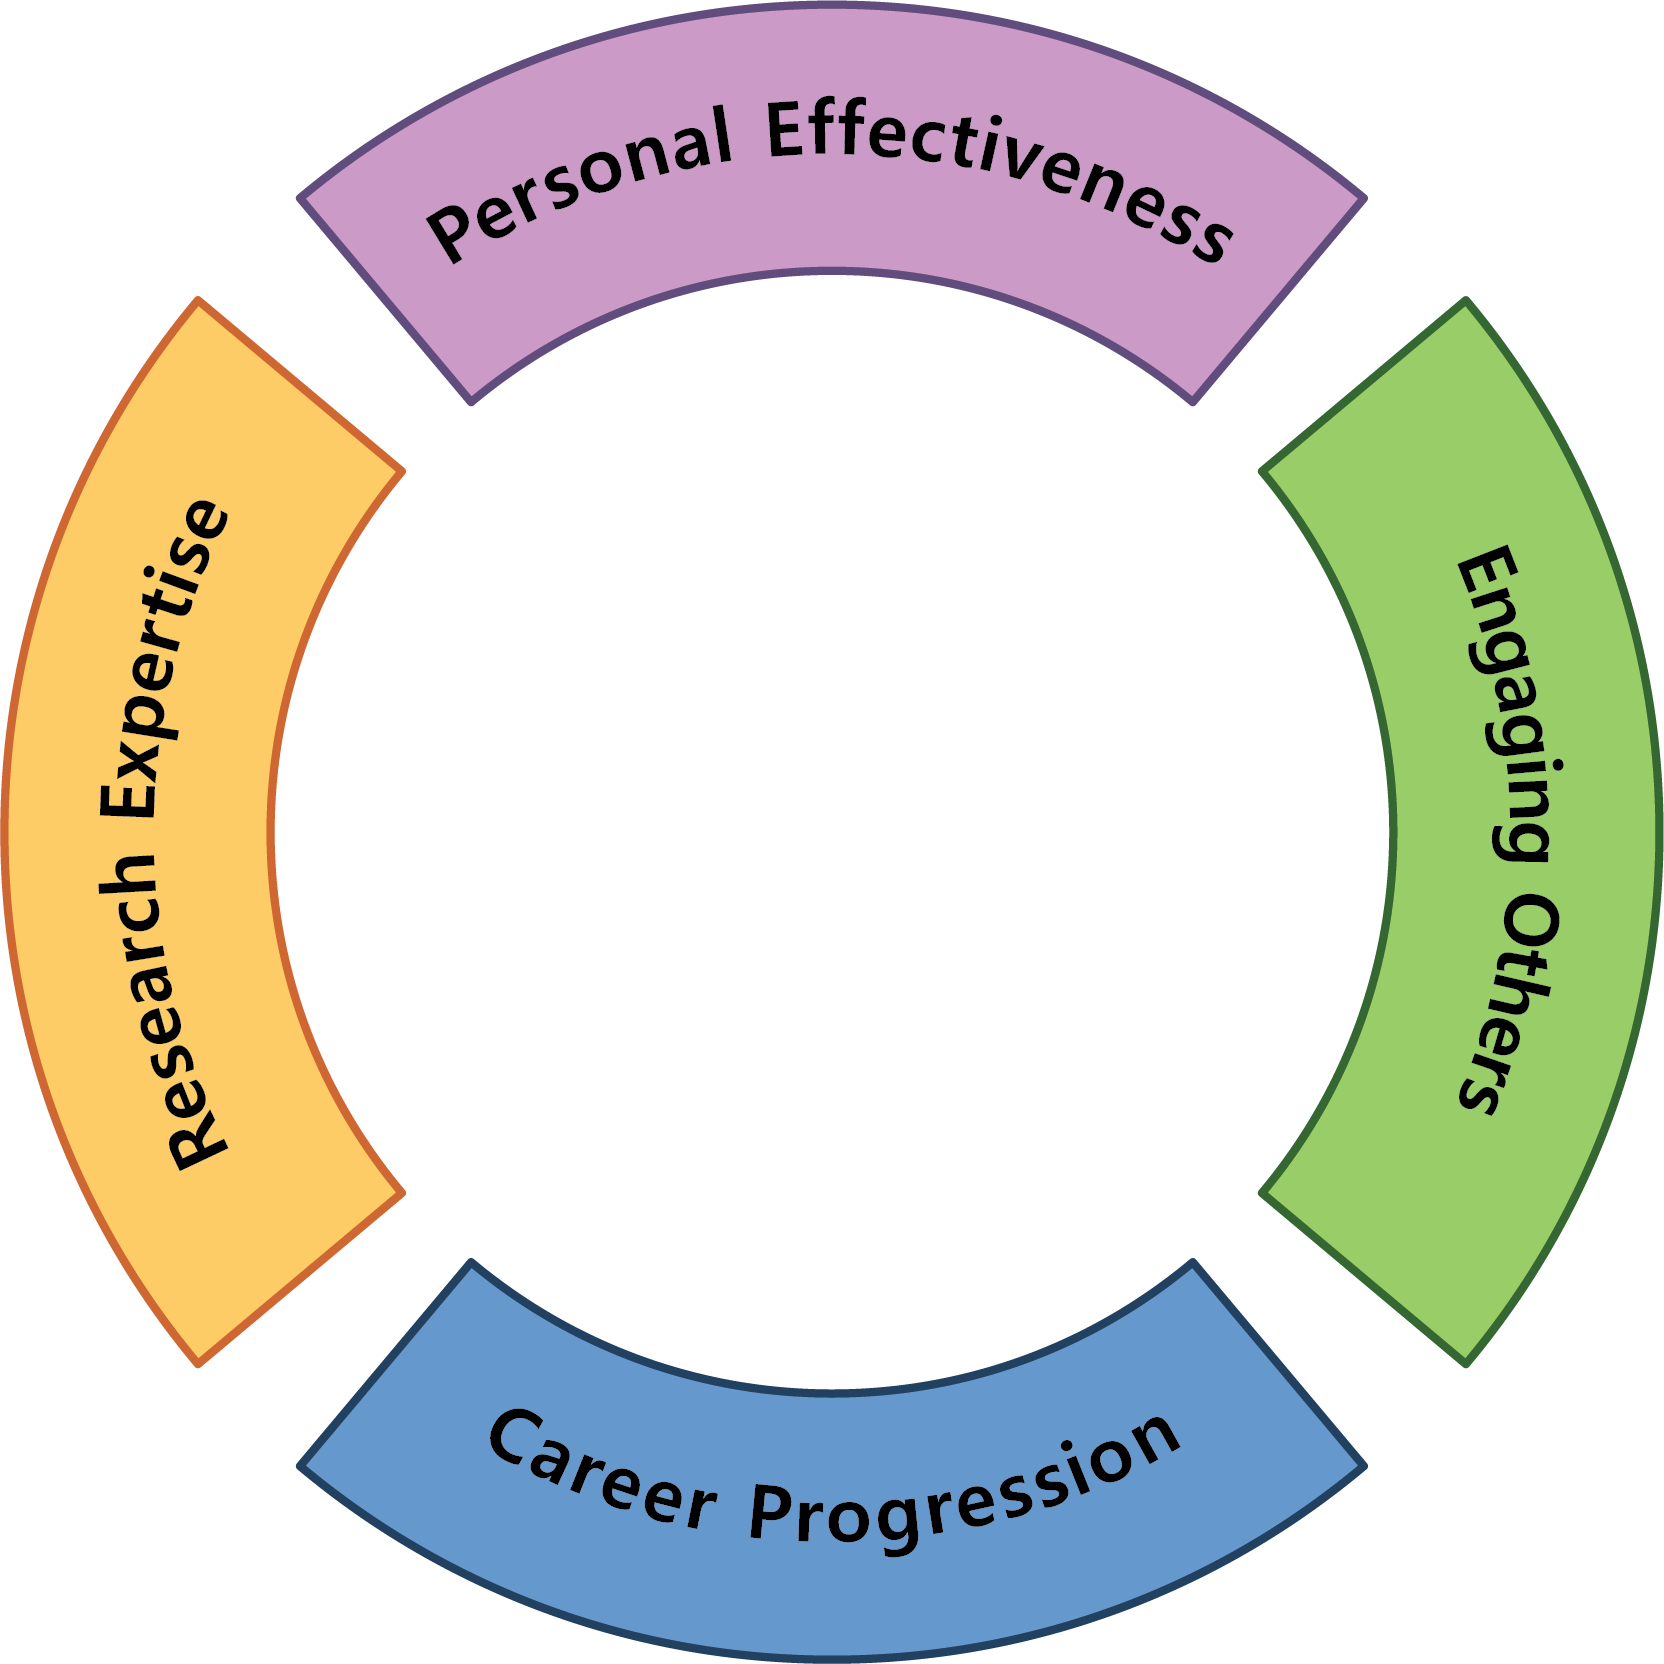 The Cambridge Researcher Development Framework presented as four sections in a ring